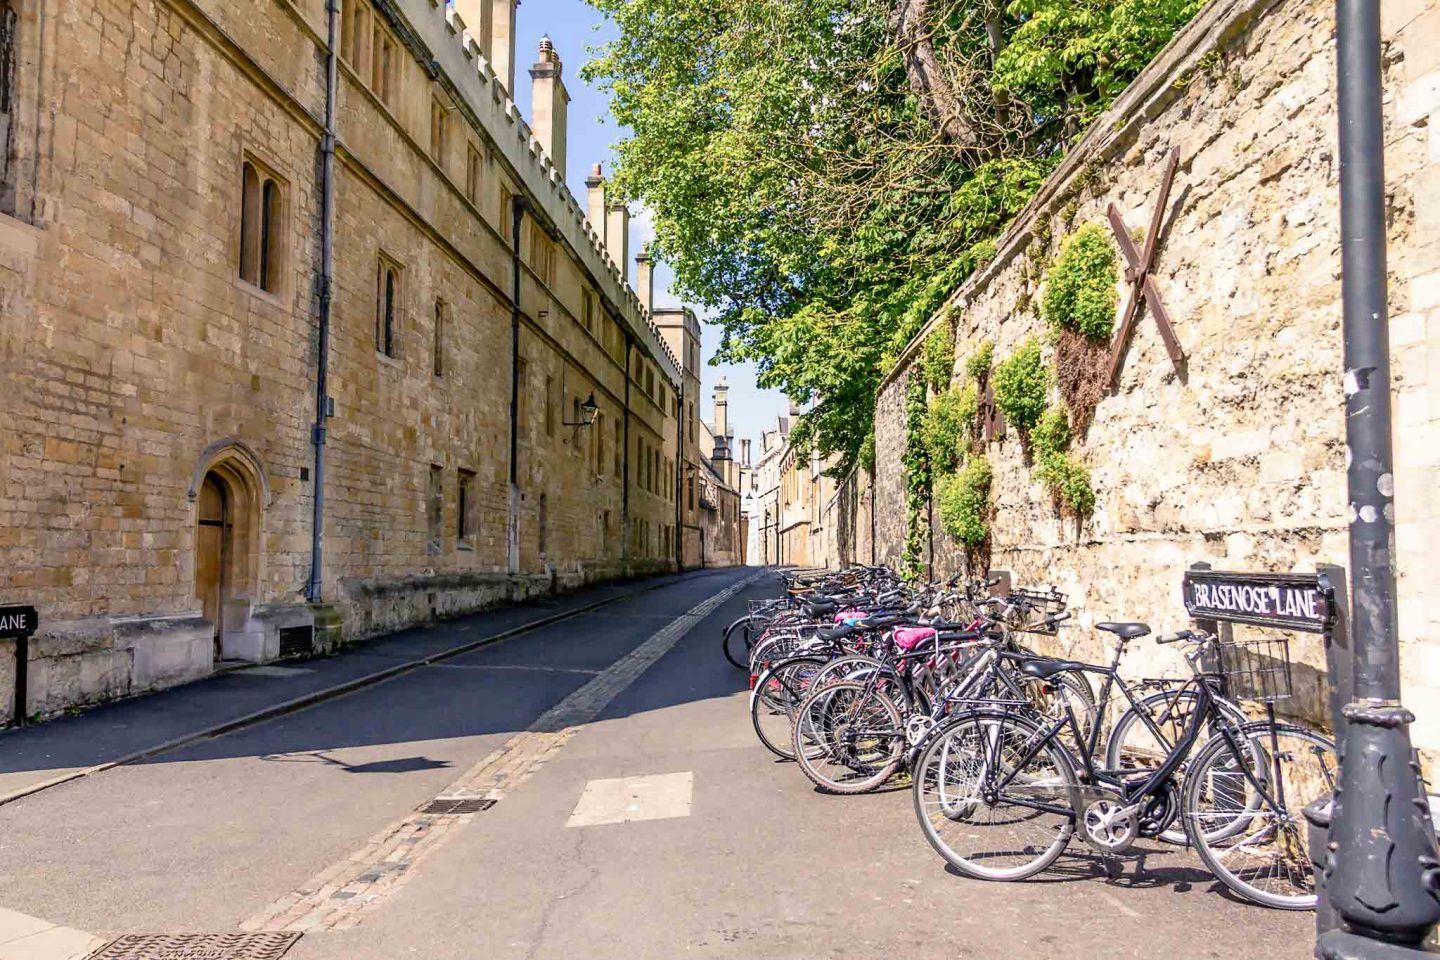 Harry Potter sites in Oxford | Harry Potter locations in Oxford